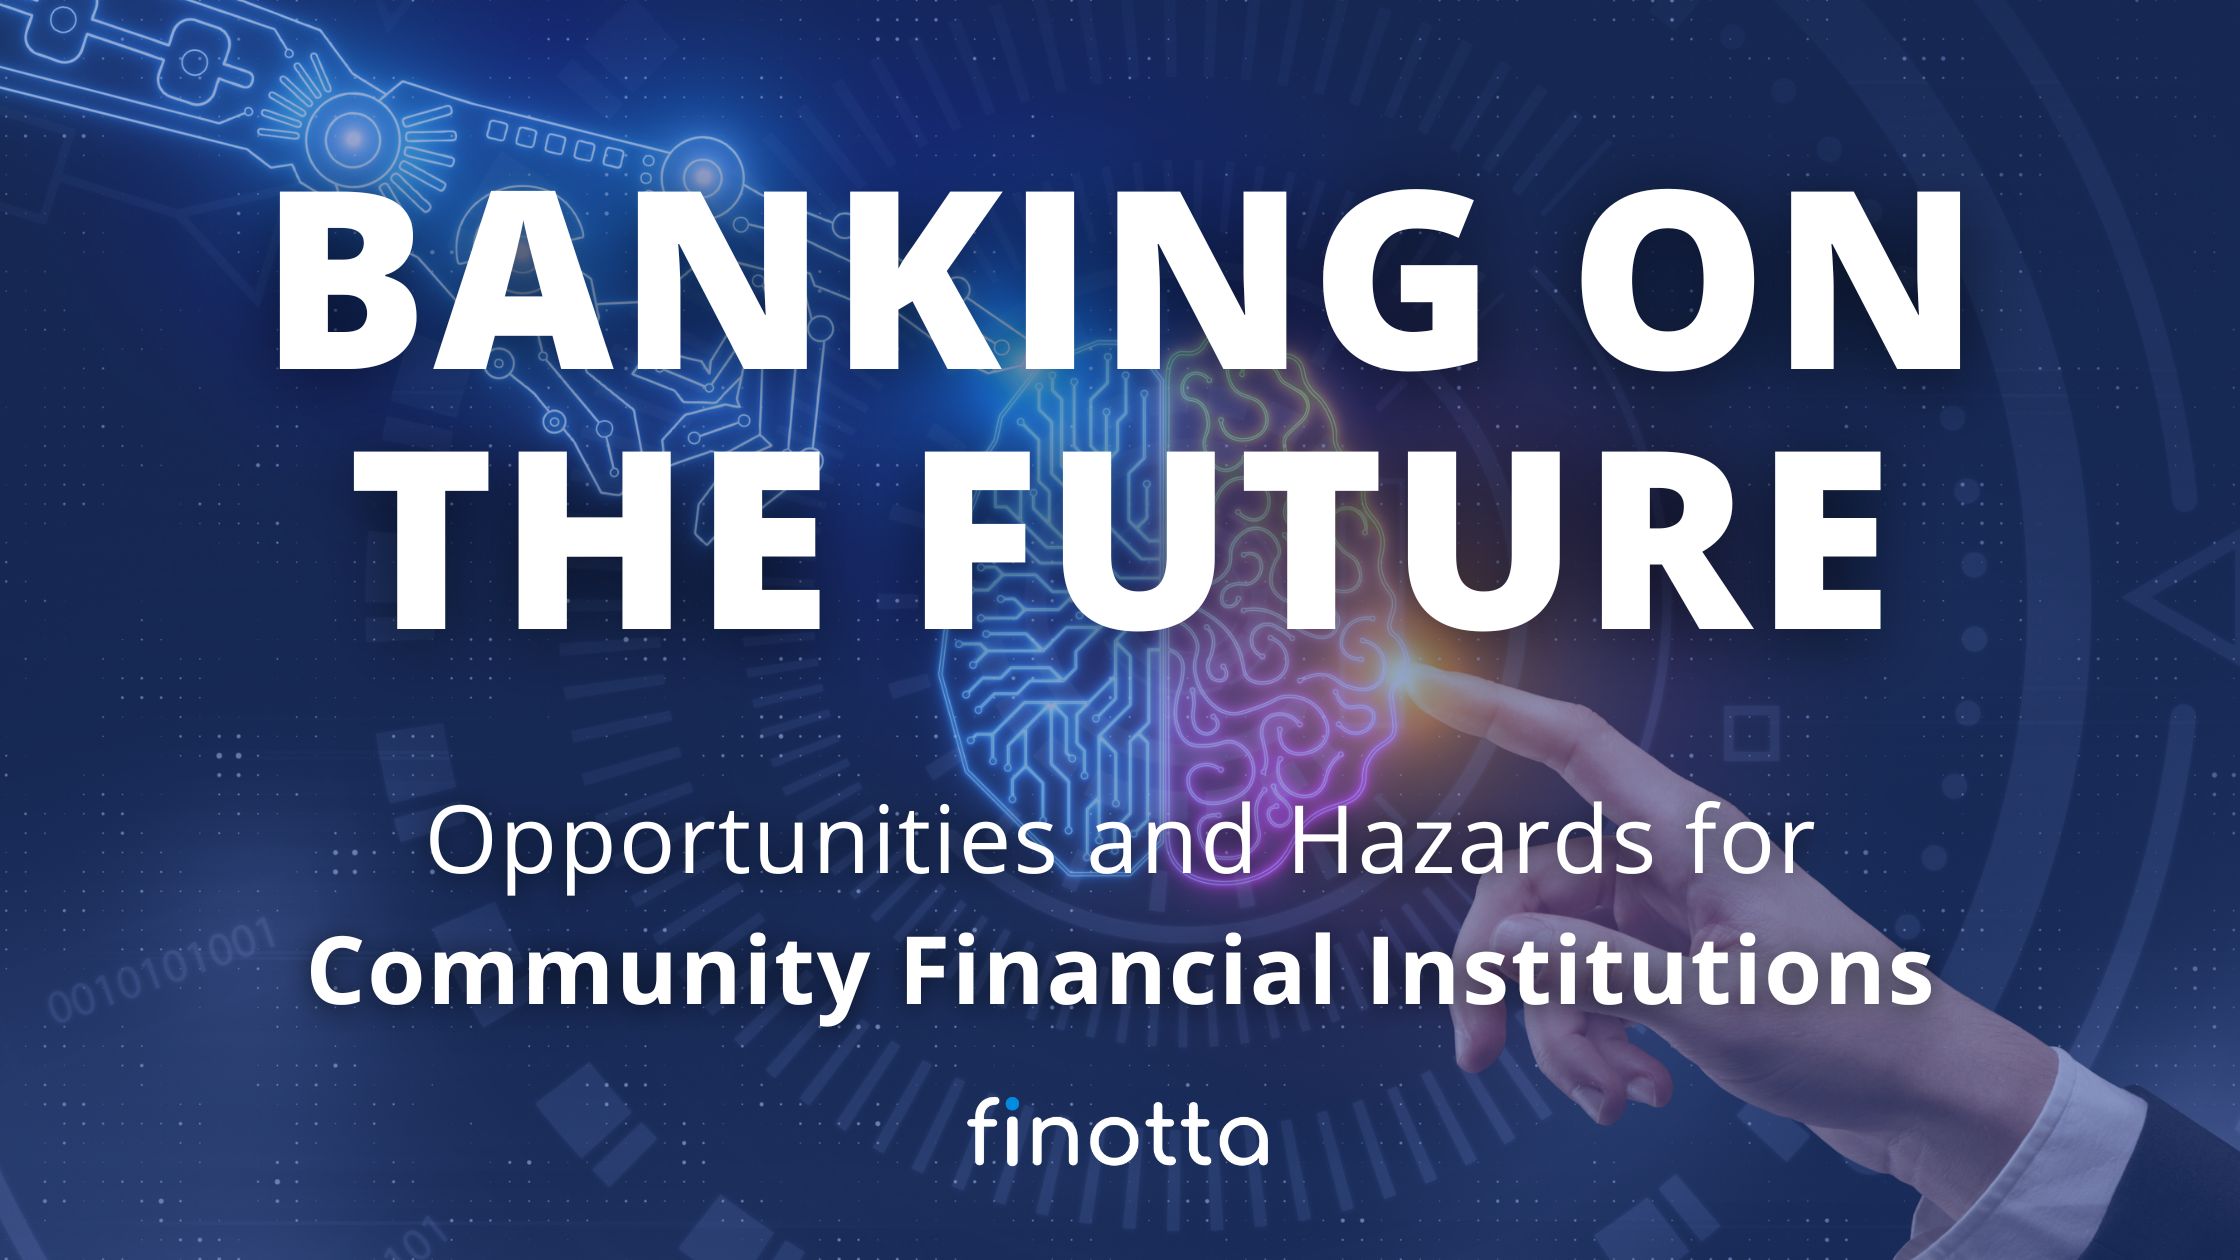 Banking on the Future: Opportunities and Hazards for Community Financial Institutions